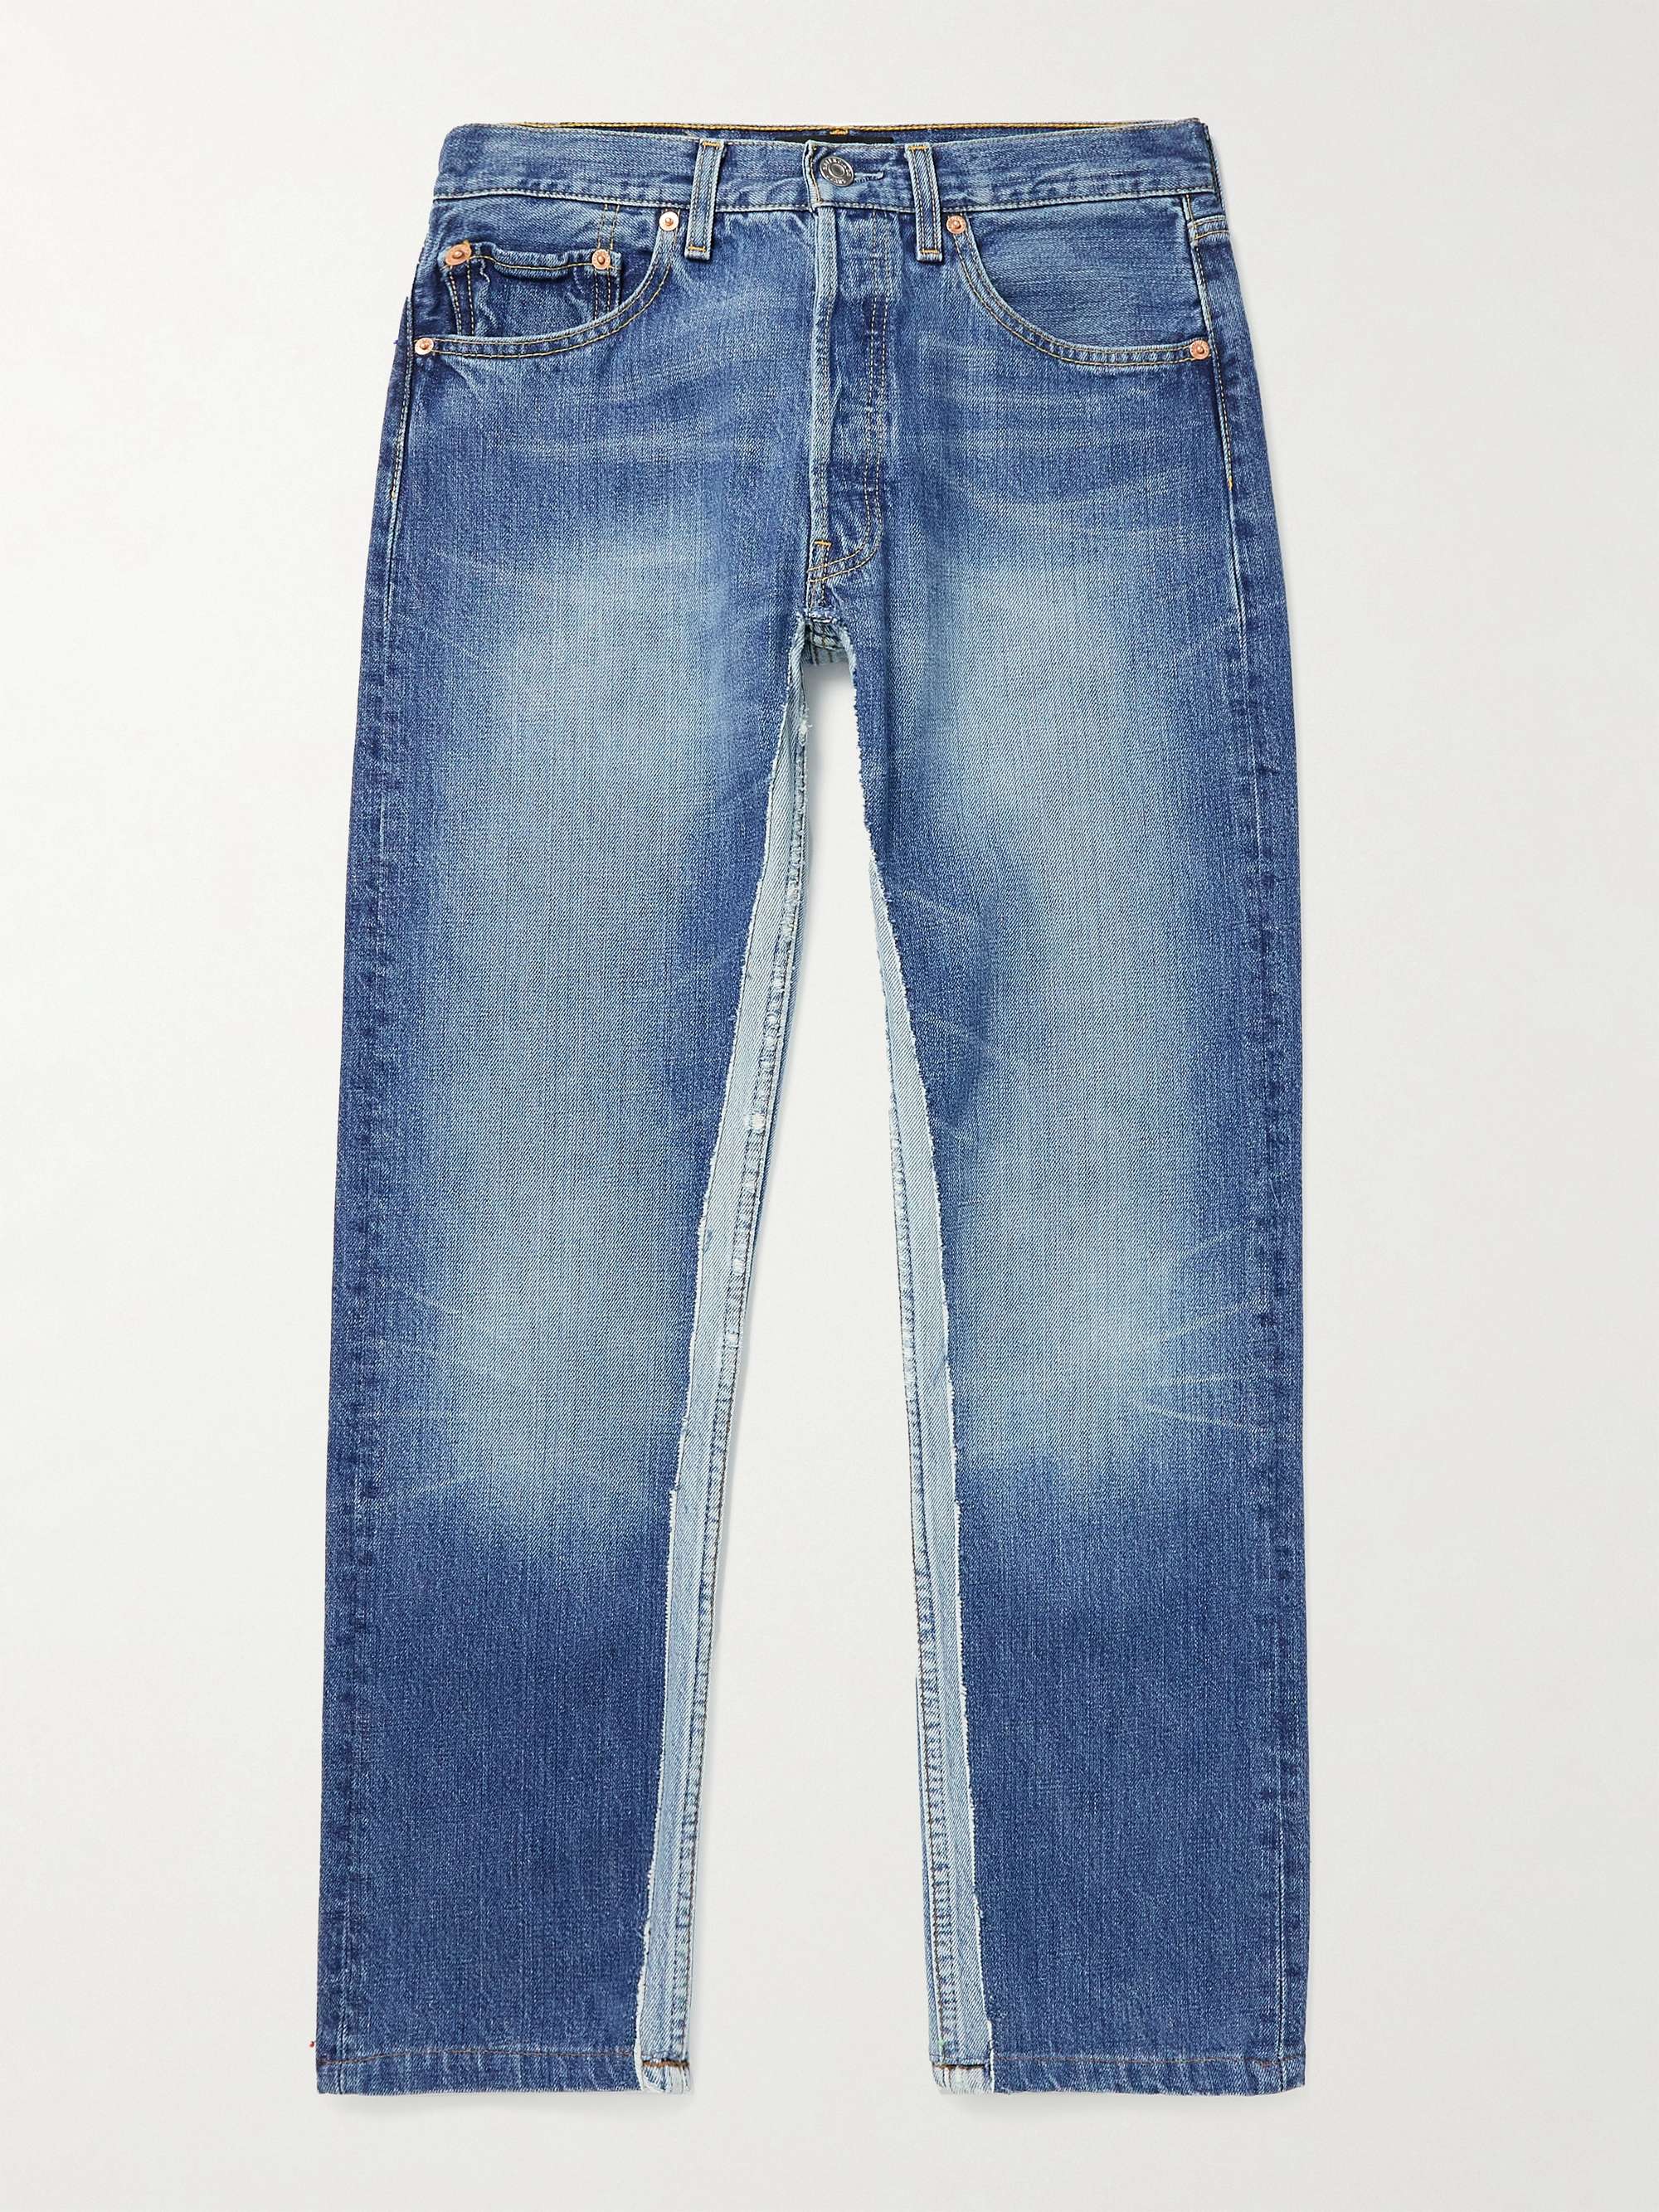 BALENCIAGA Slim-Fit Patchwork Two-Tone Recycled Jeans for Men | MR PORTER